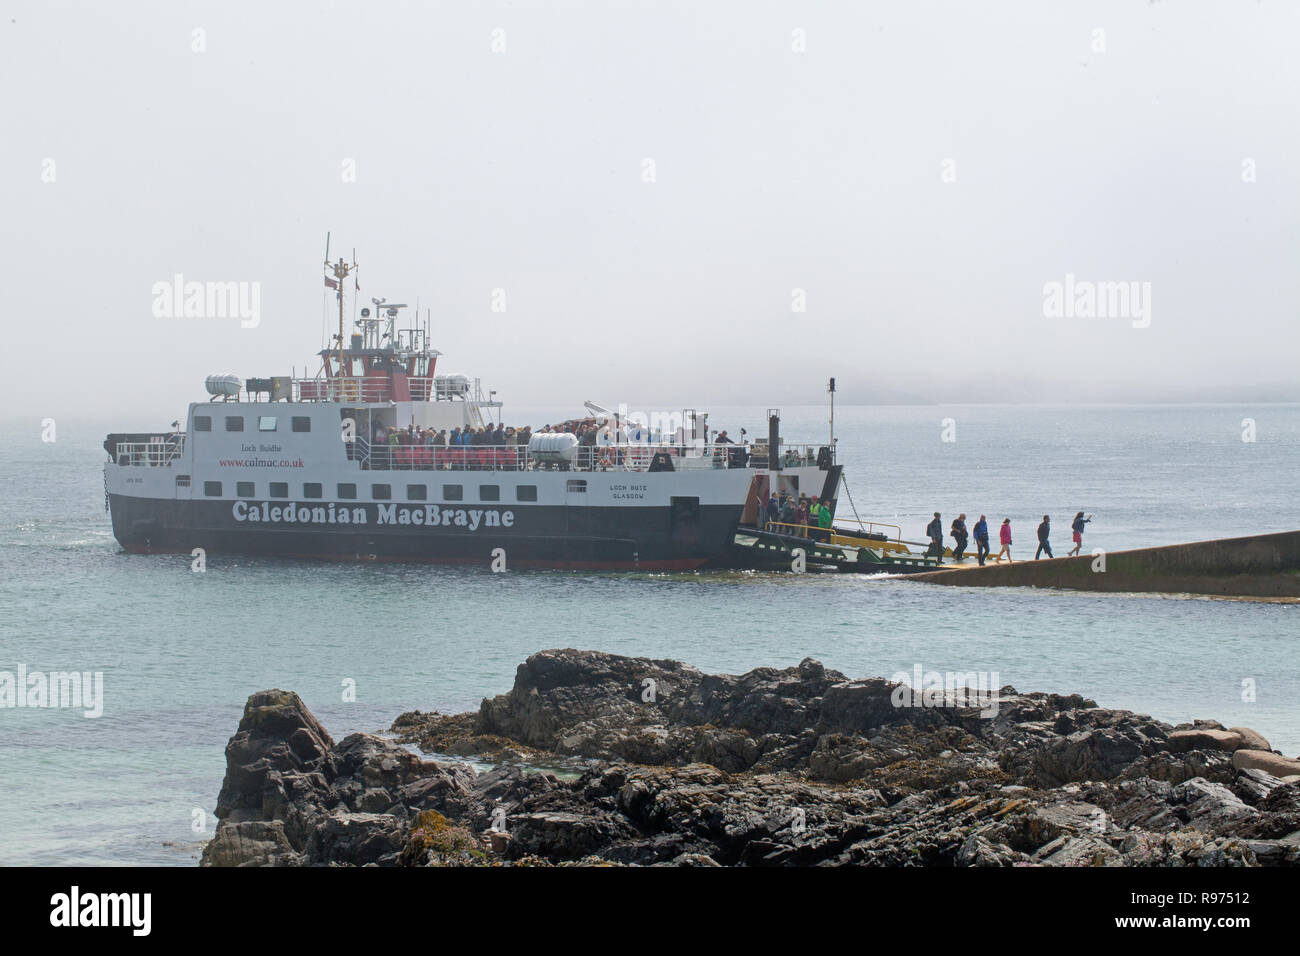 First-foot passengers of the day, arriving from Fionnphort, Mull, disembarking Quayside St. Ronan’s Bay, Isle of Iona. The Inner Hebrides, Argyll and Bute, West Coast of Scotland. The UK. Stock Photo